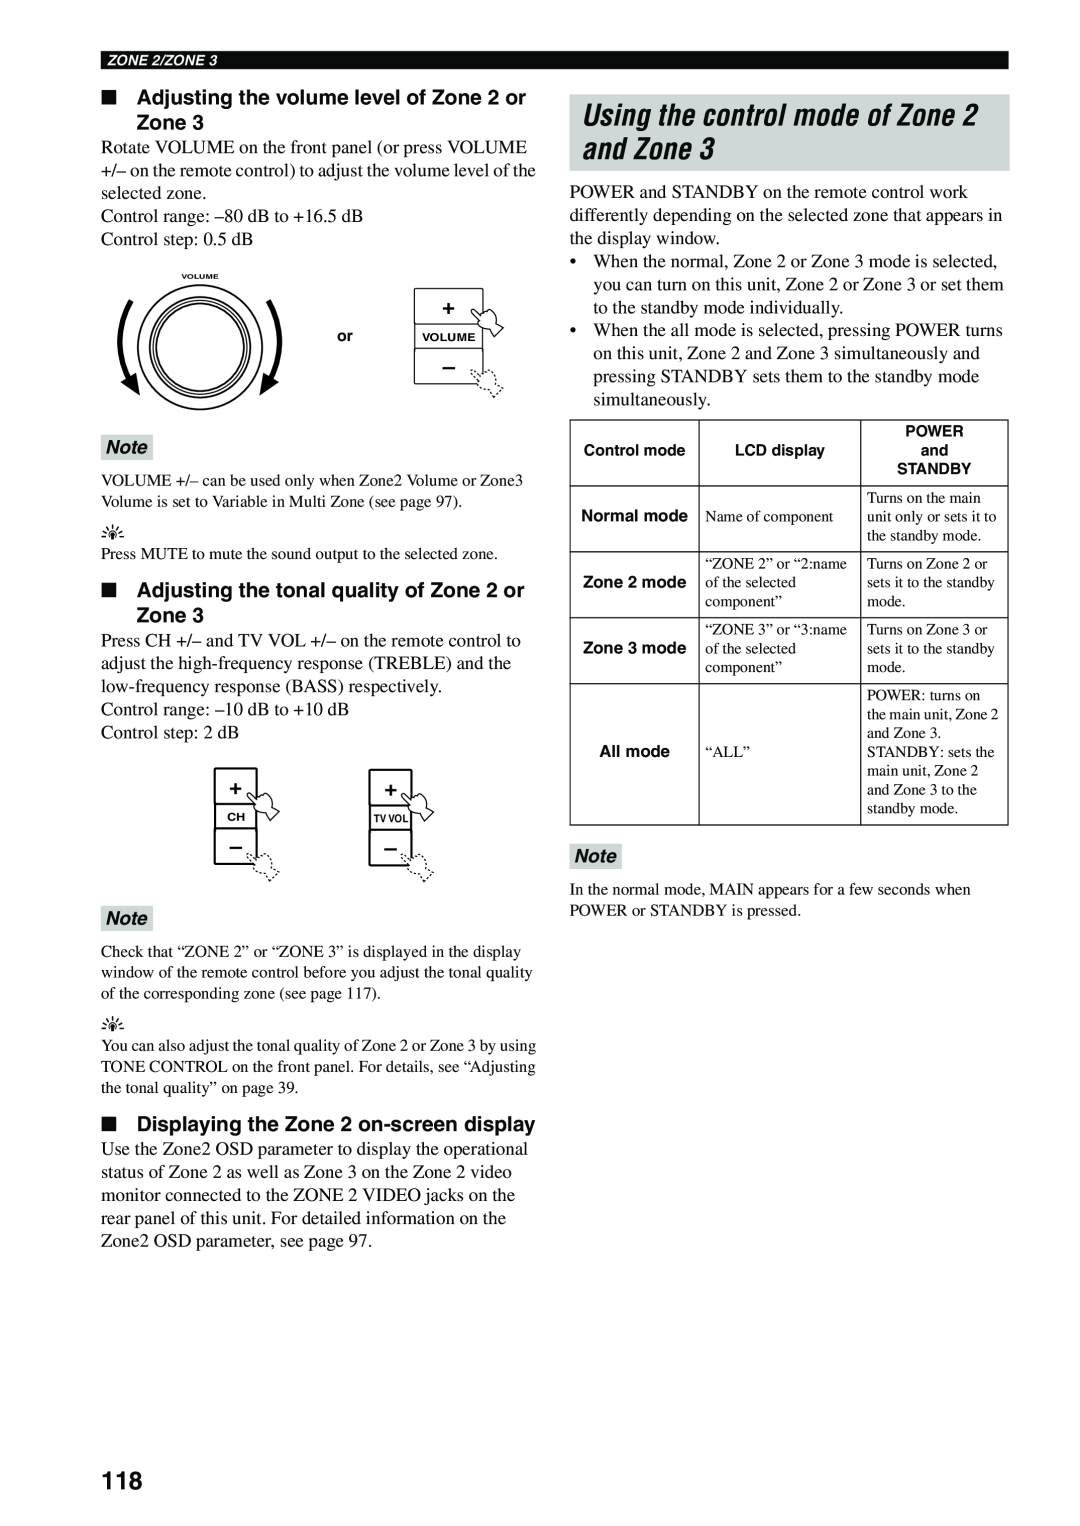 Yamaha X-V2600 owner manual Using the control mode of Zone 2 and Zone, Adjusting the volume level of Zone 2 or Zone 